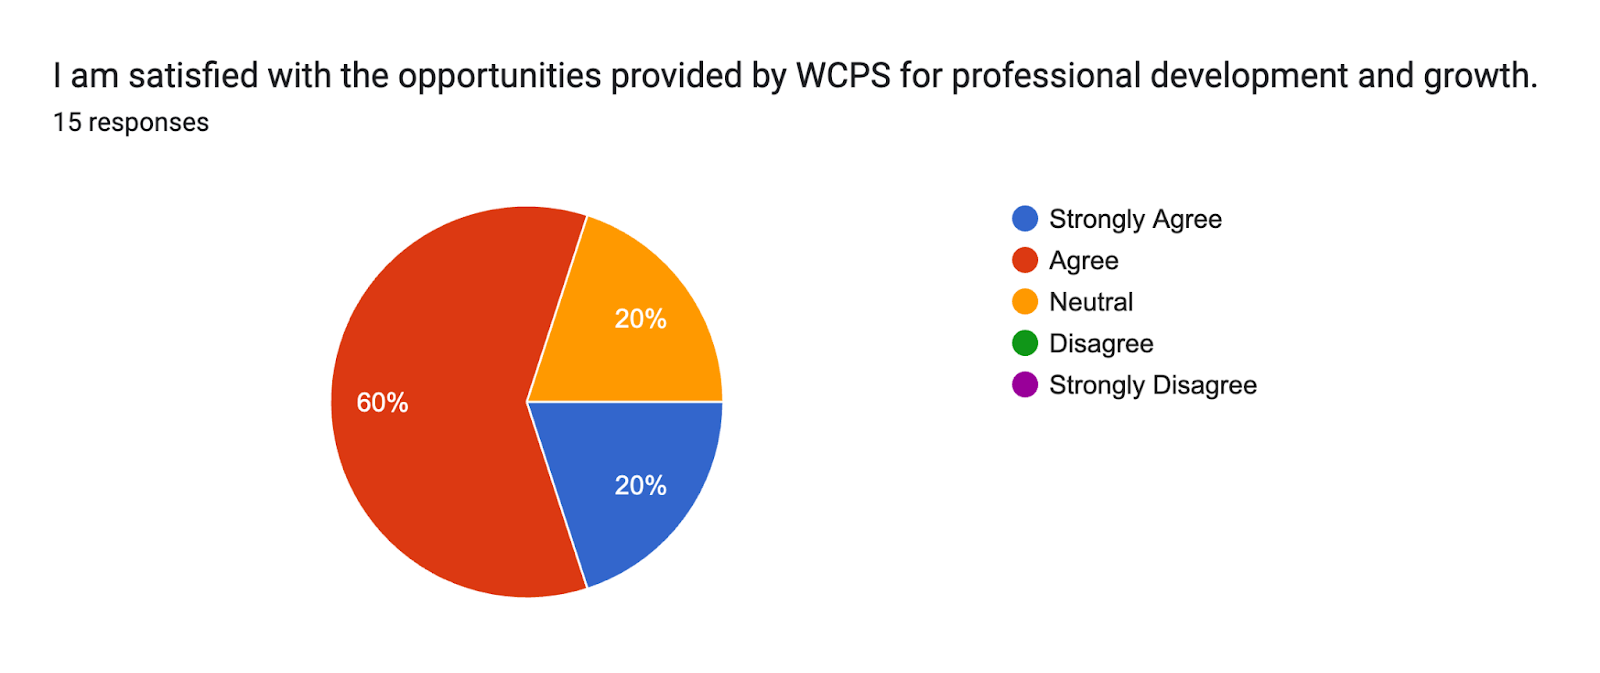 Forms response chart. Question title: I am satisfied with the opportunities provided by WCPS for professional development and growth.
. Number of responses: 15 responses.